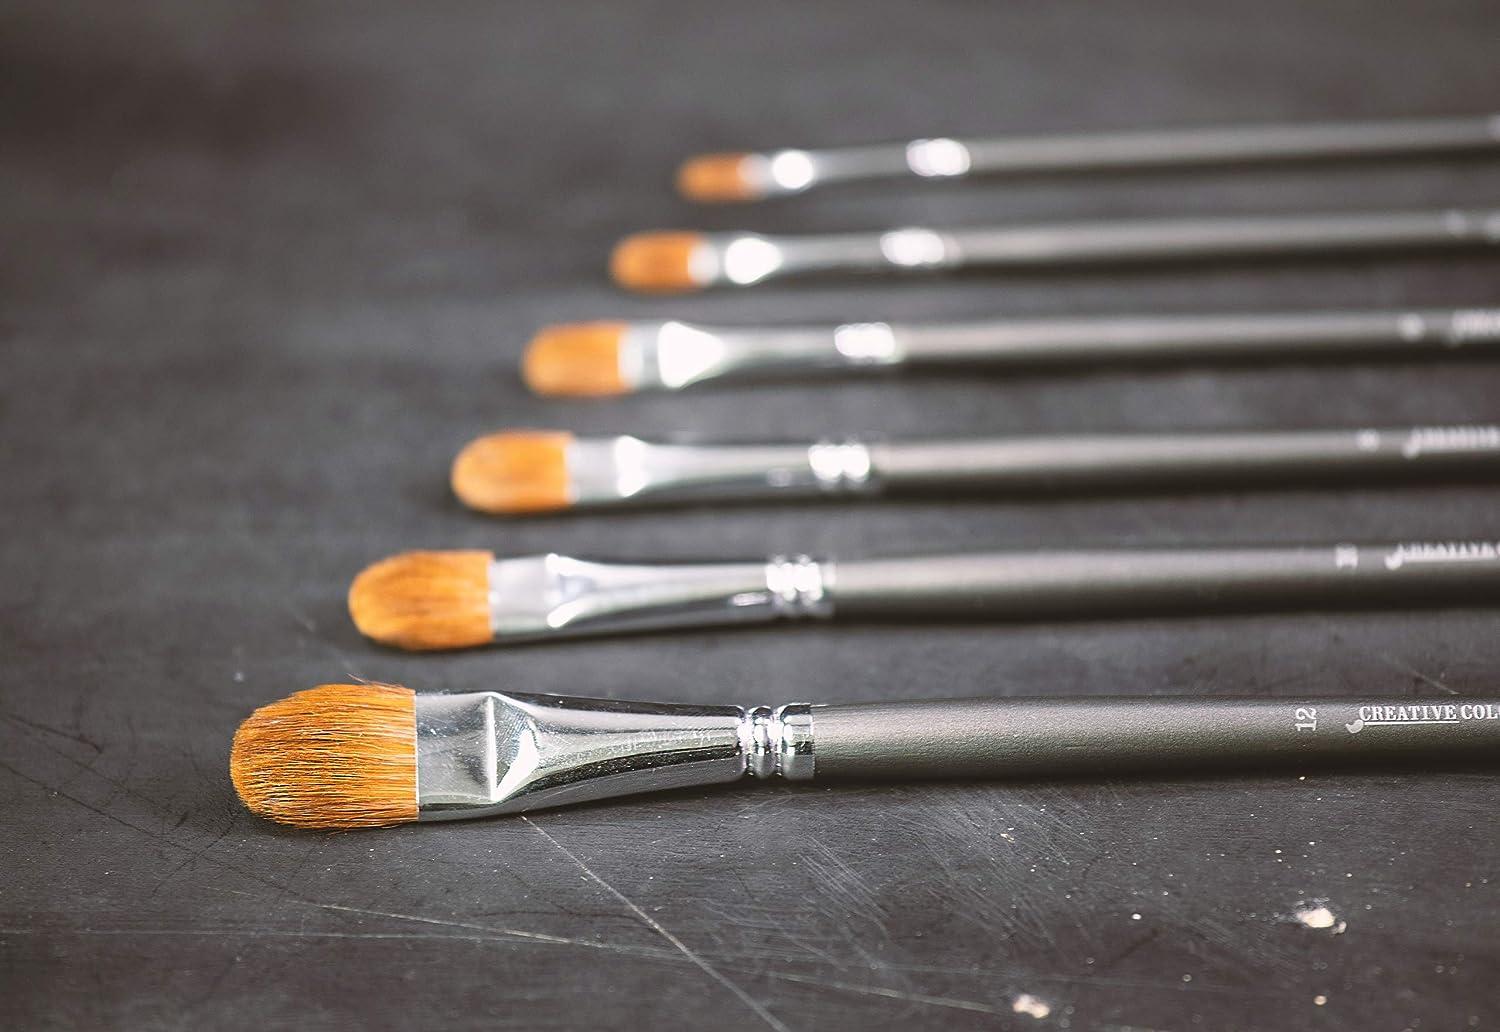 Paint Brush for Acrylic Painting - Large Paint Brushes for Acrylic Painting  - Acrylic Paint Brush - Detail Brush Set for Oil Watercolor, Free Painting  Course